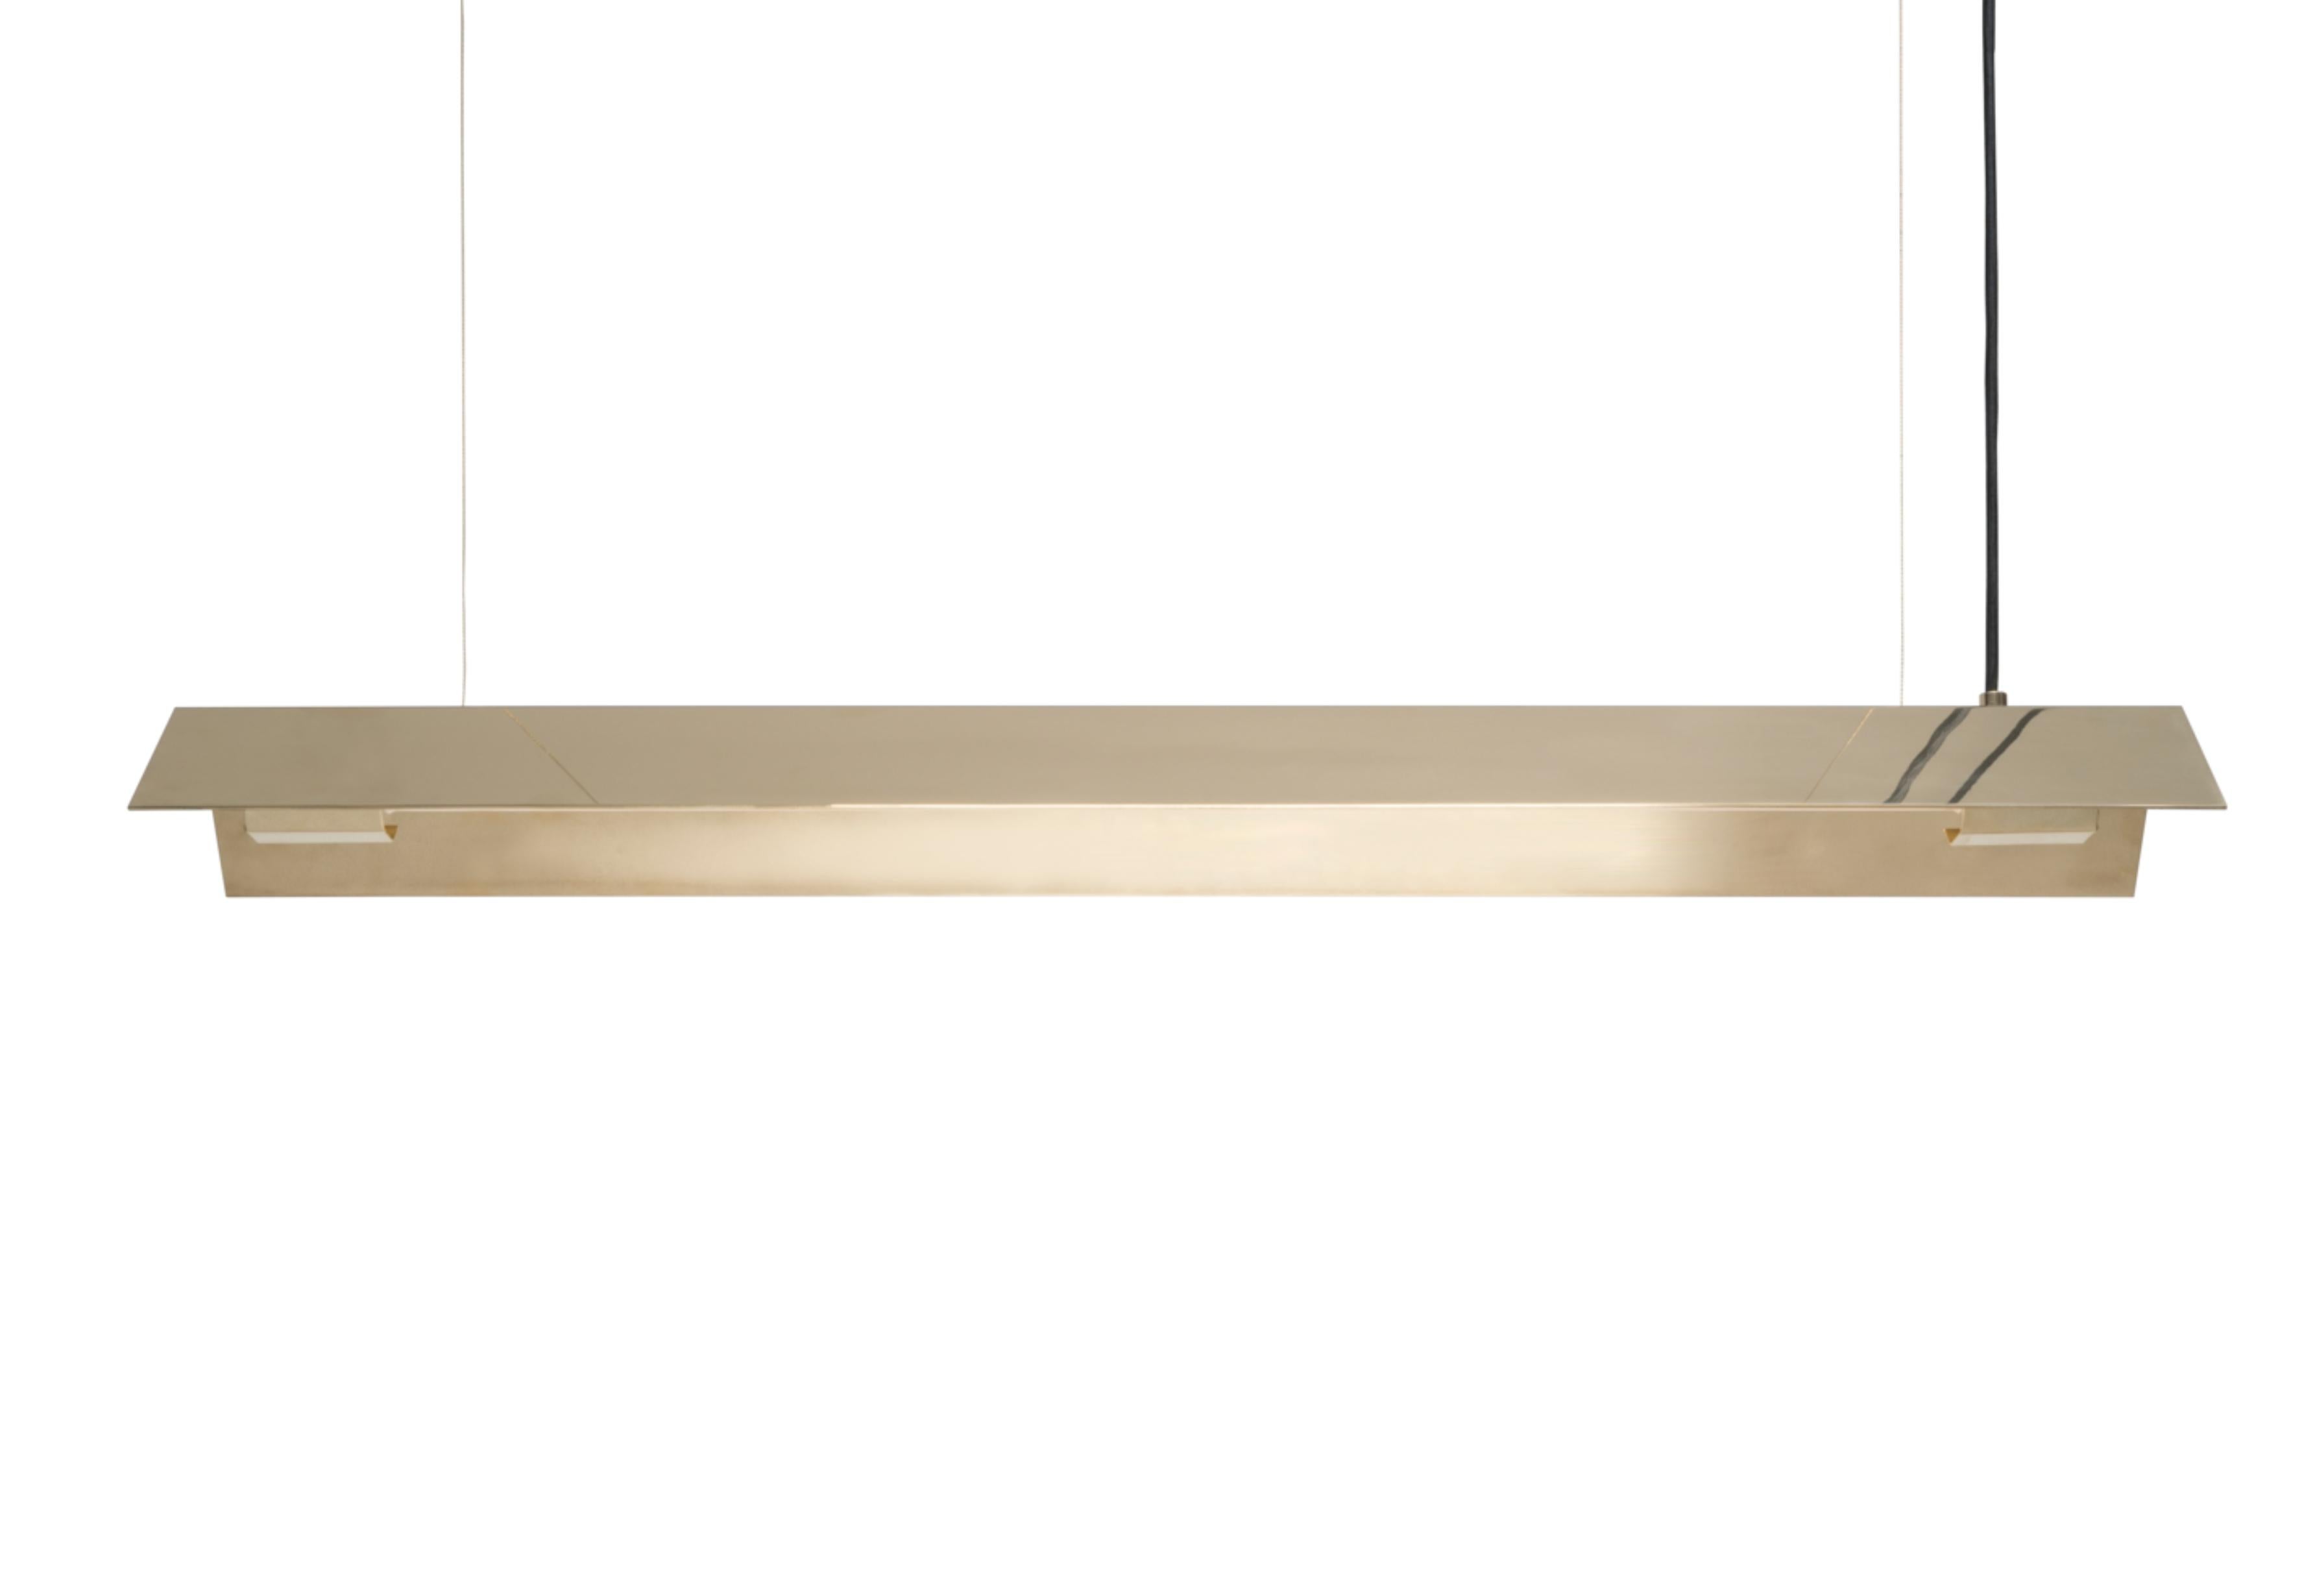 Medium Misalliance solid brass suspended light by Lexavala
Dimensions: D 16 x W 100 x H 8 cm
Materials: Brass.

There are two lenghts of socket covers, extending over the LED. Two short are to be found in Suspended and Surface, and one long in